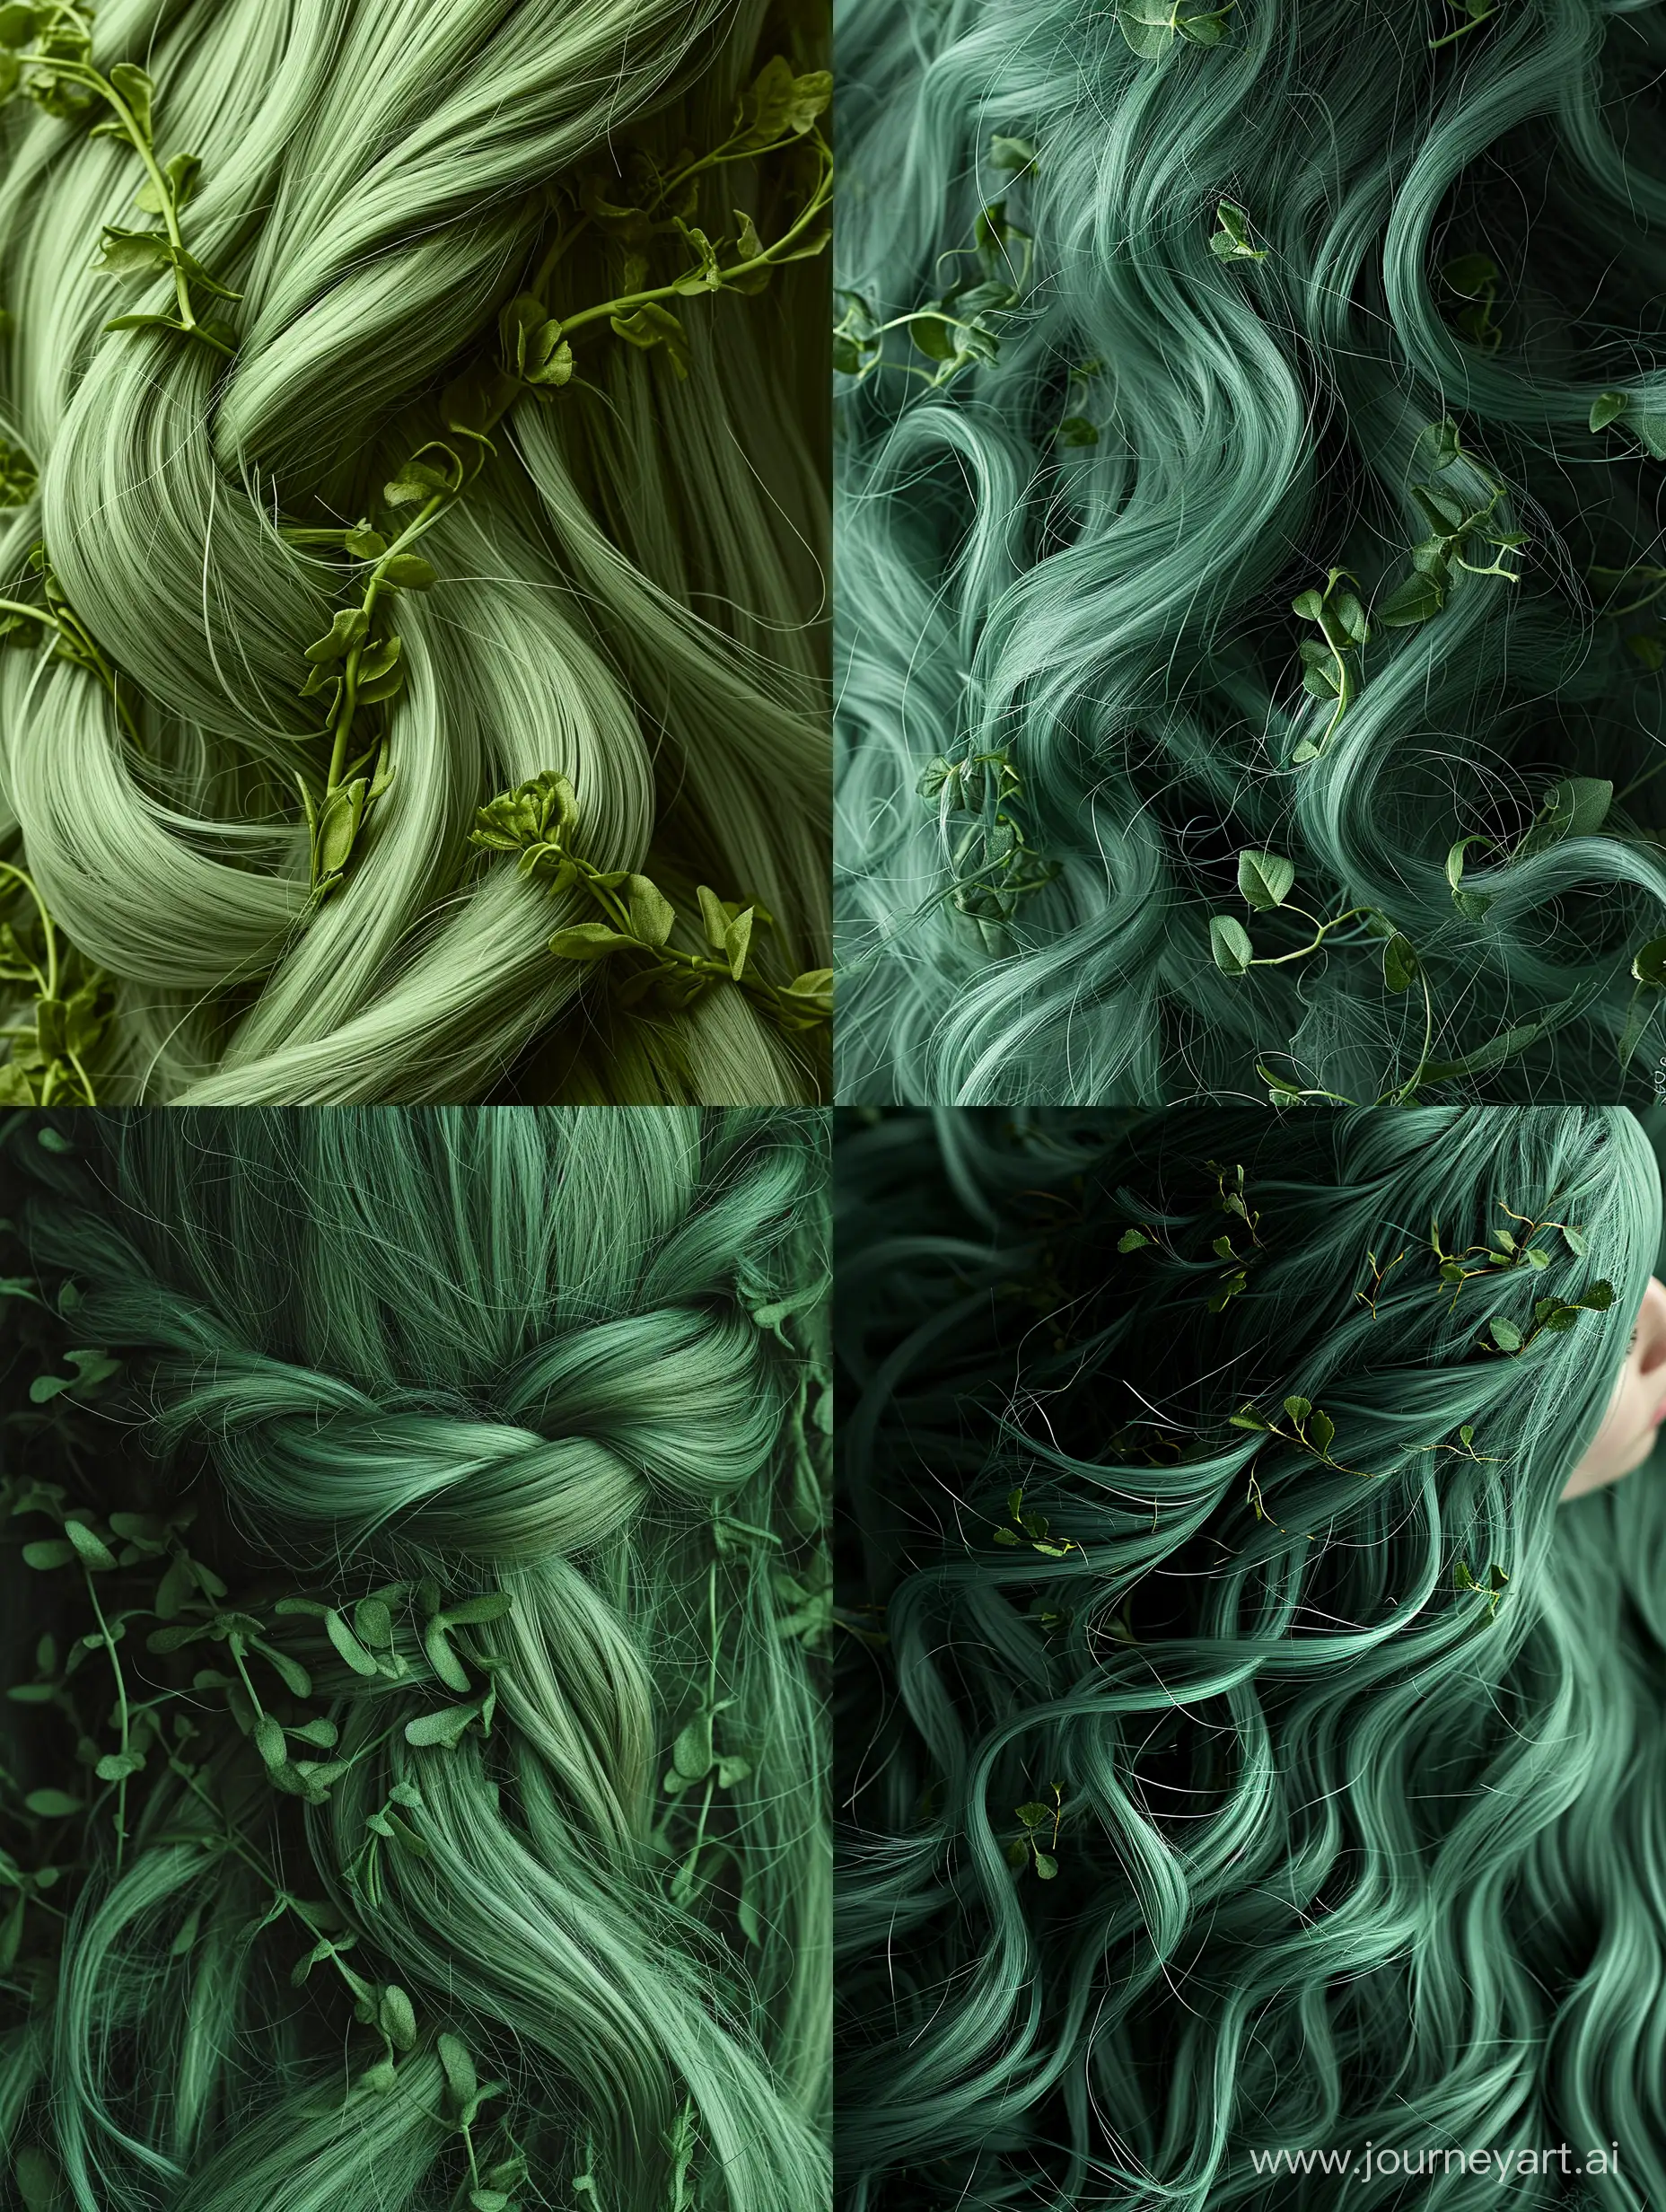 Witness a captivating vertical close-up of intricately woven green-tinted locks, resembling a unique fusion with the beauty of plants and foliage. Notice the delicate presence of tiny leaves entwined within the hair. Explore the harmonious connection between human and nature, celebrating the intertwining elements of our natural landscapes."